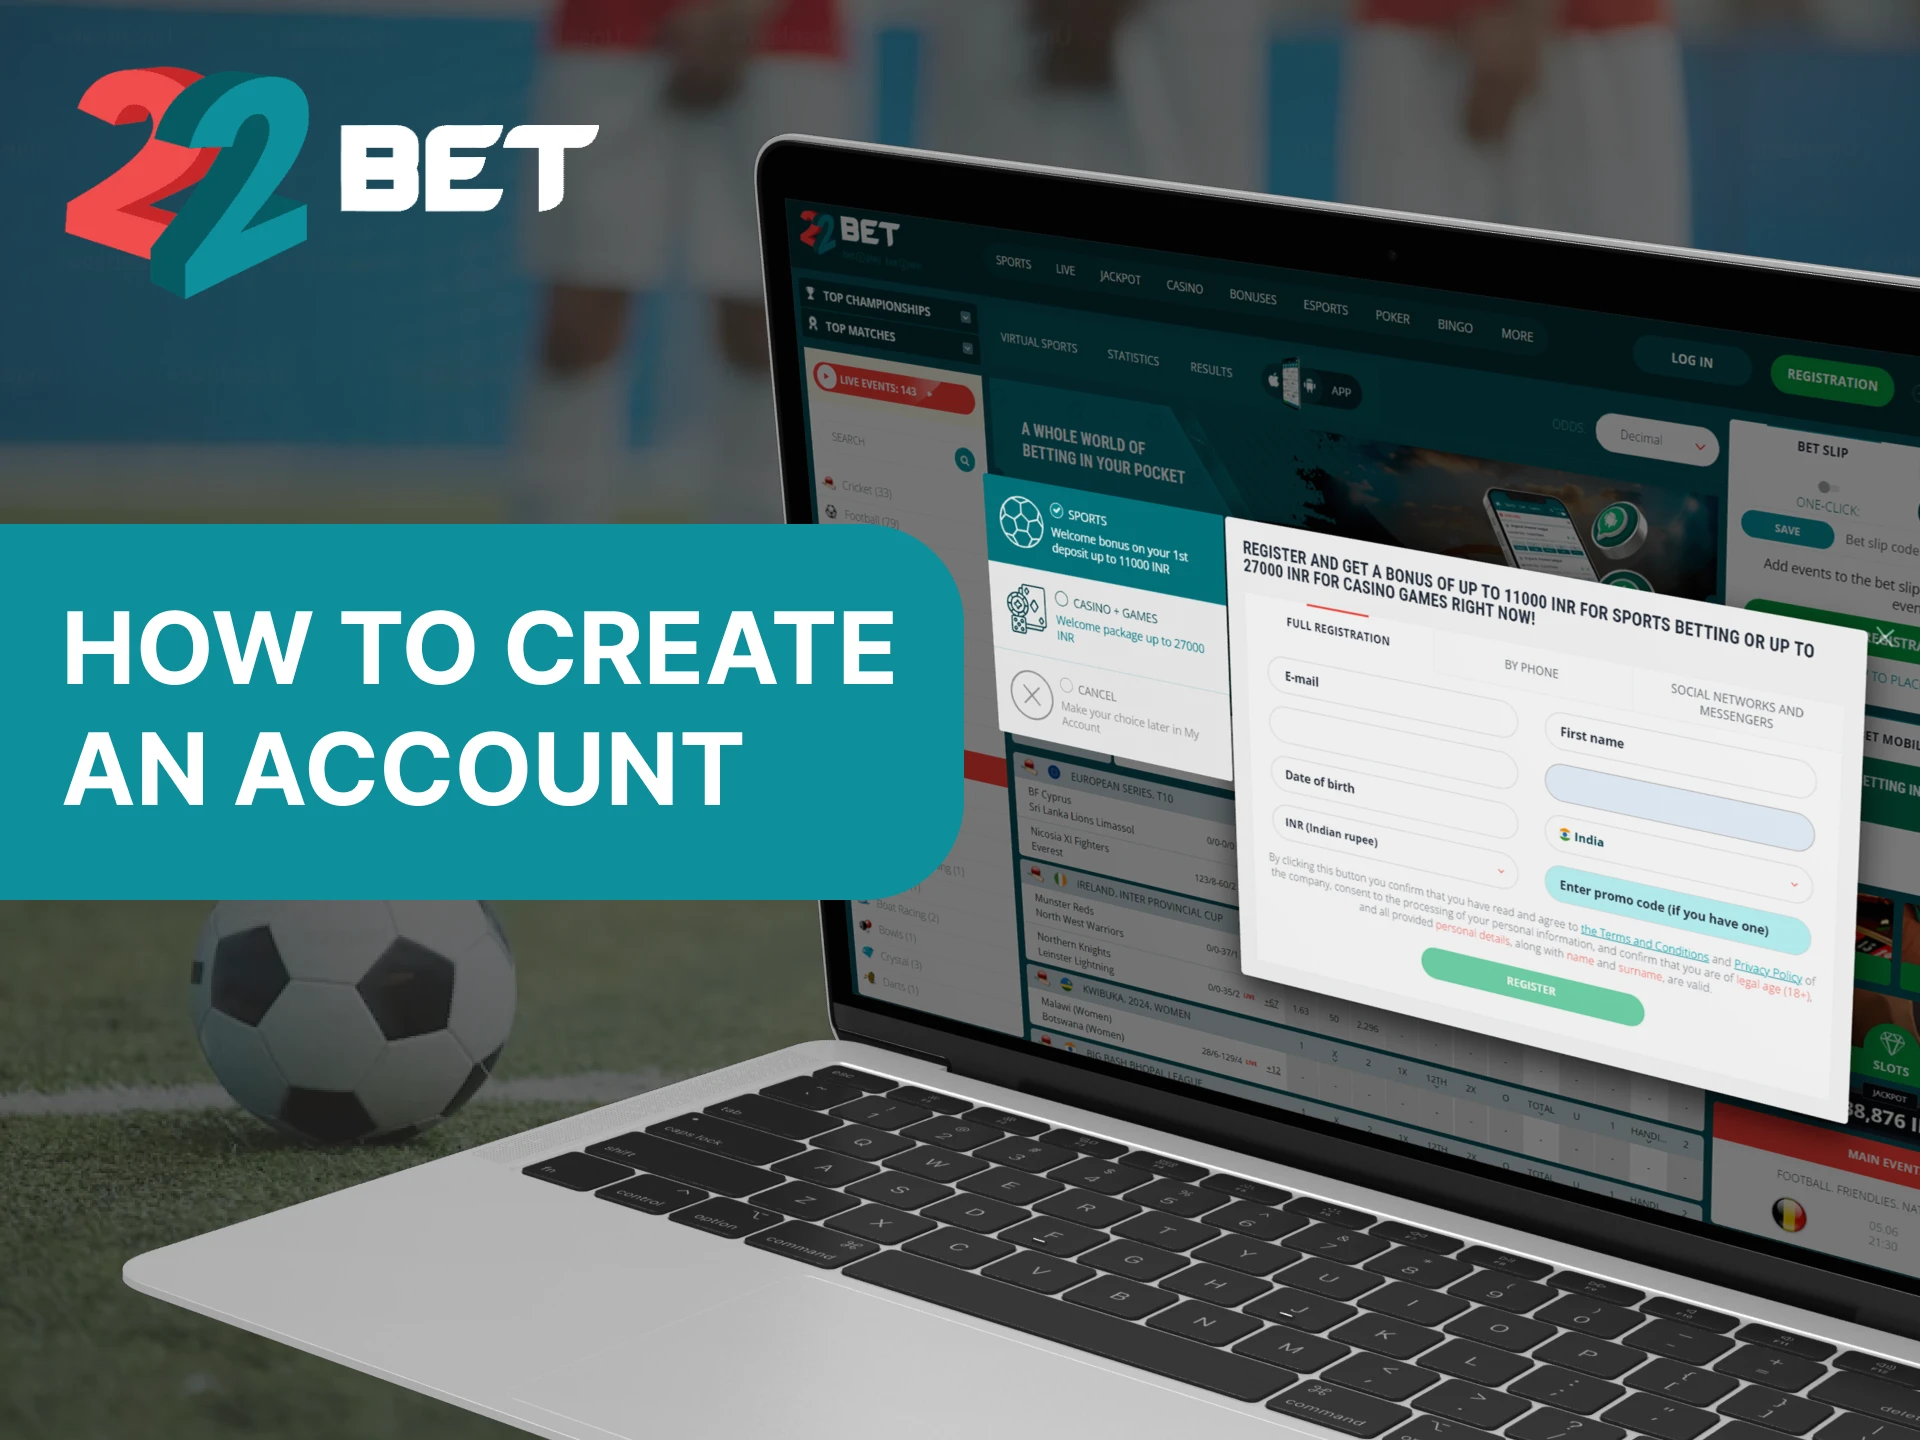 Register an account at 22Bet using your favorite method.